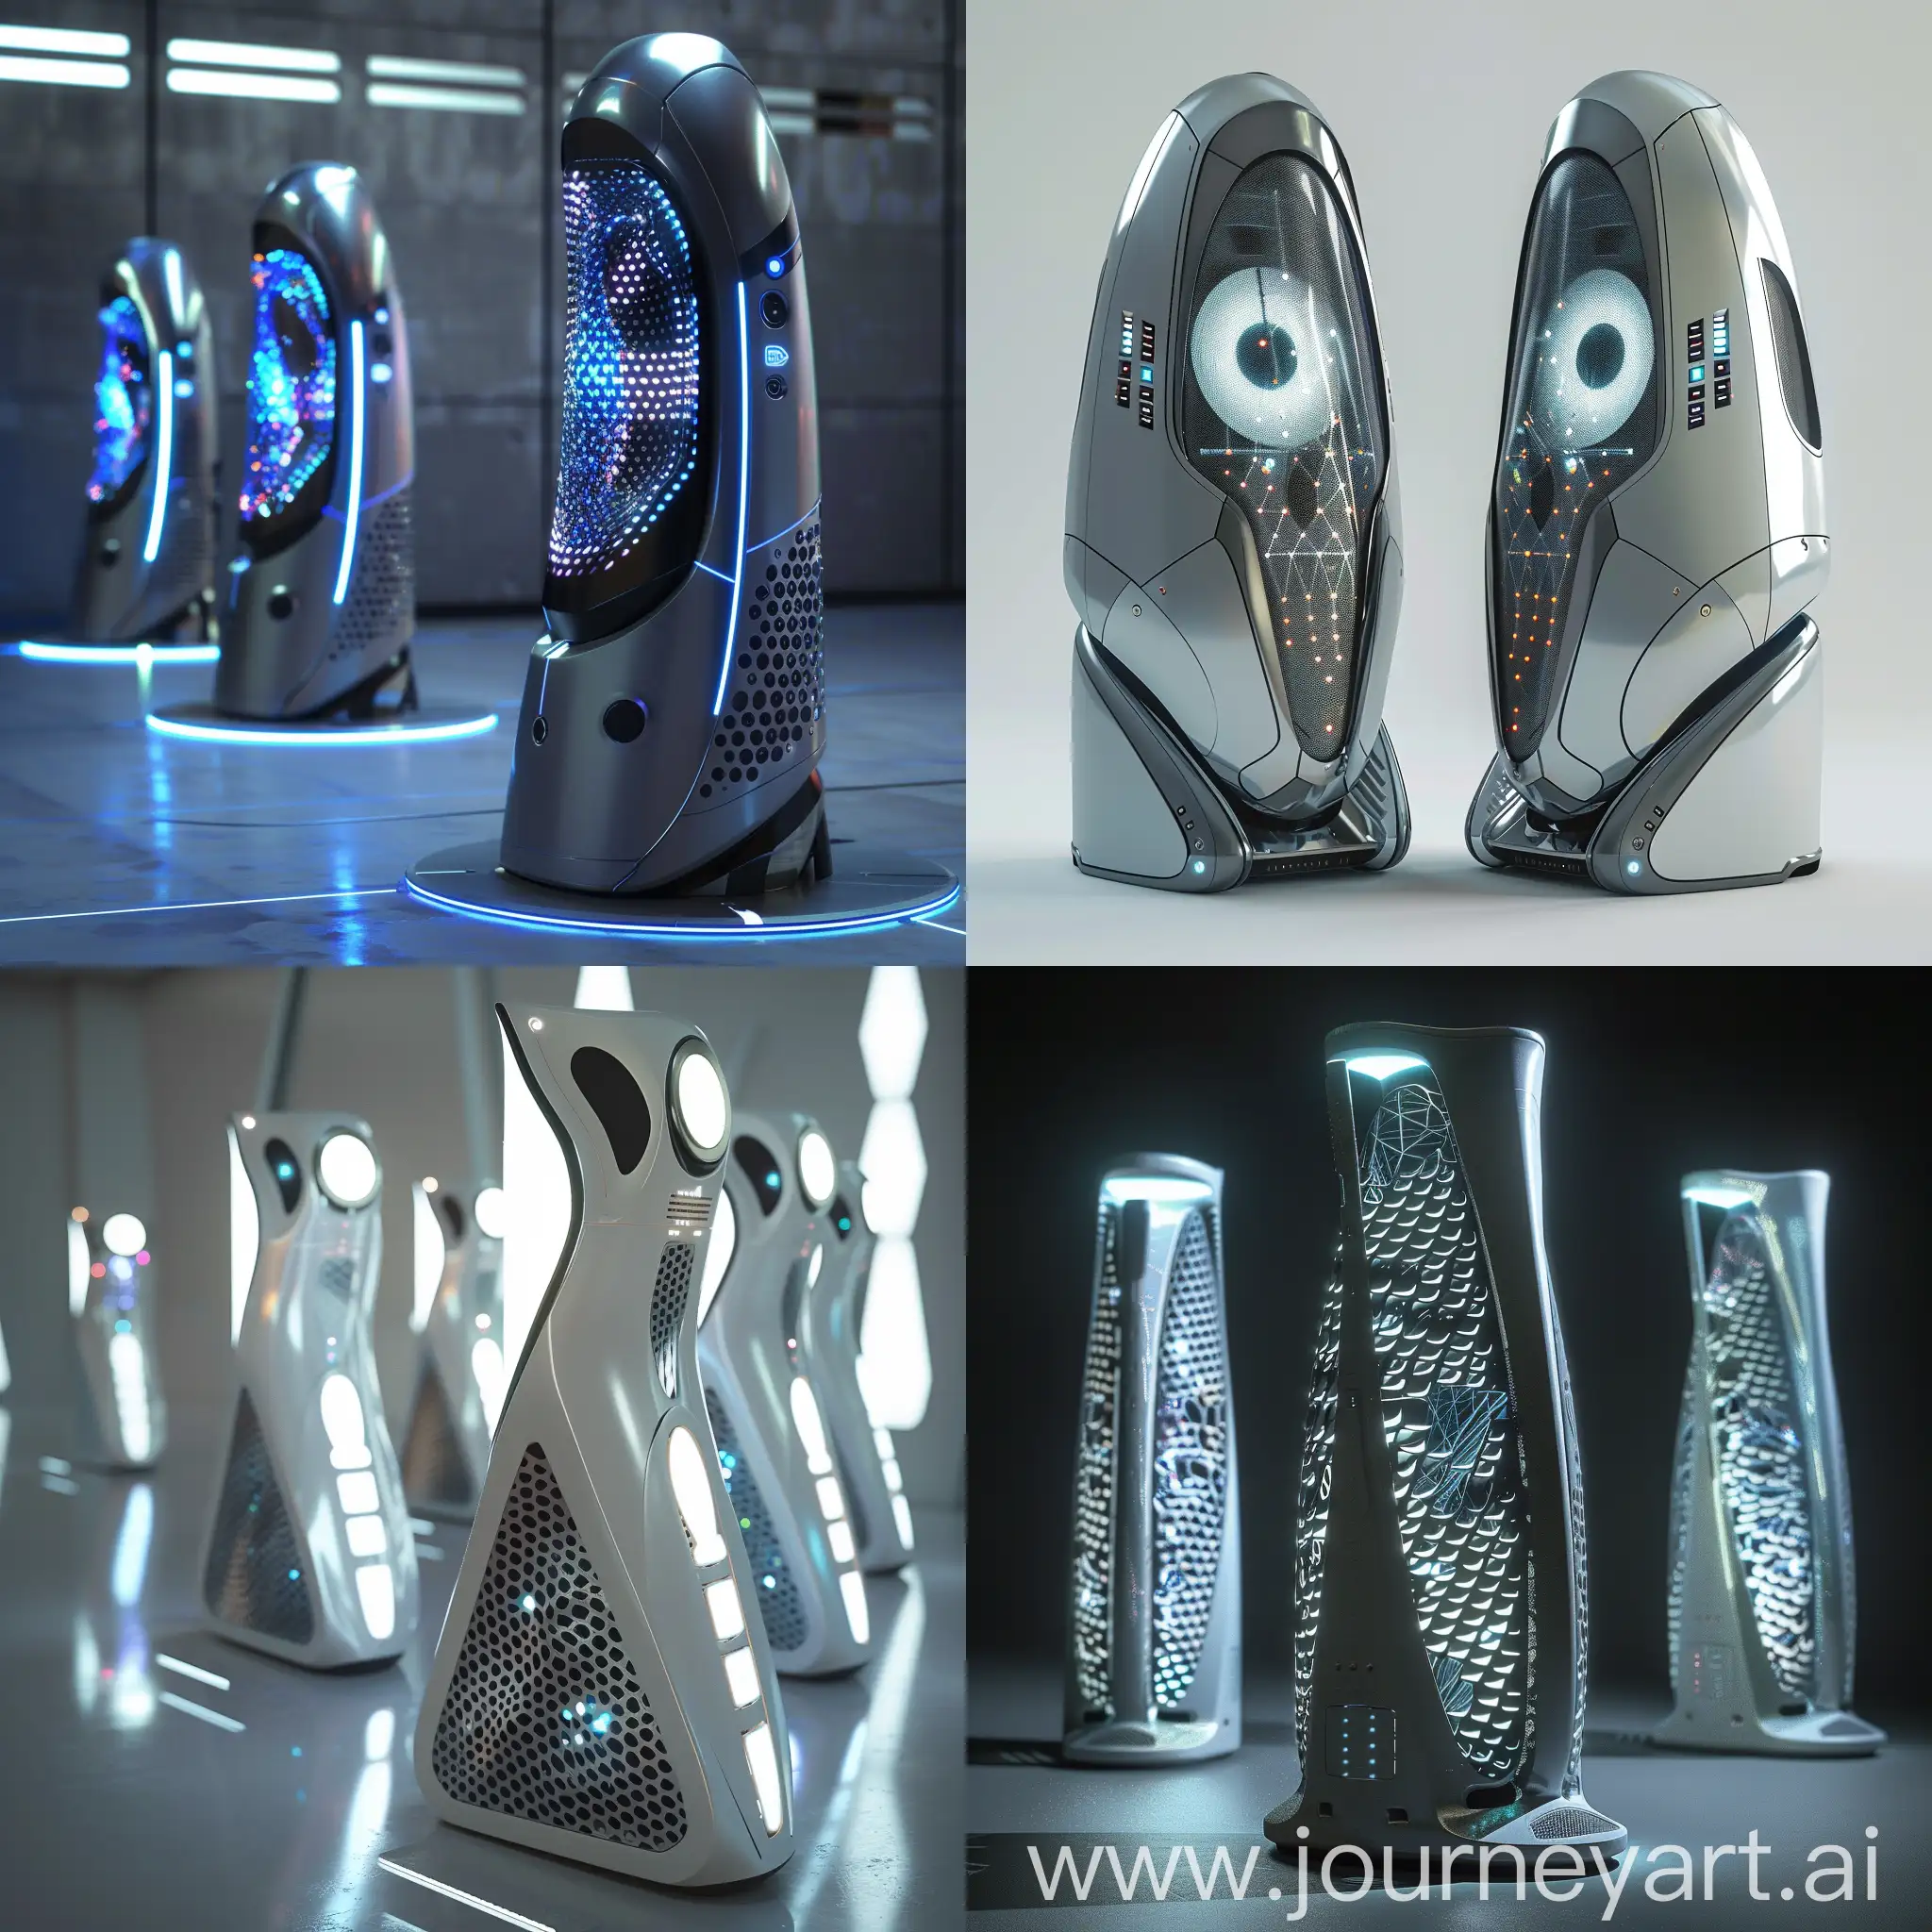 Futuristic-PC-Speakers-with-Pulsating-LED-Lights-and-Holographic-Displays